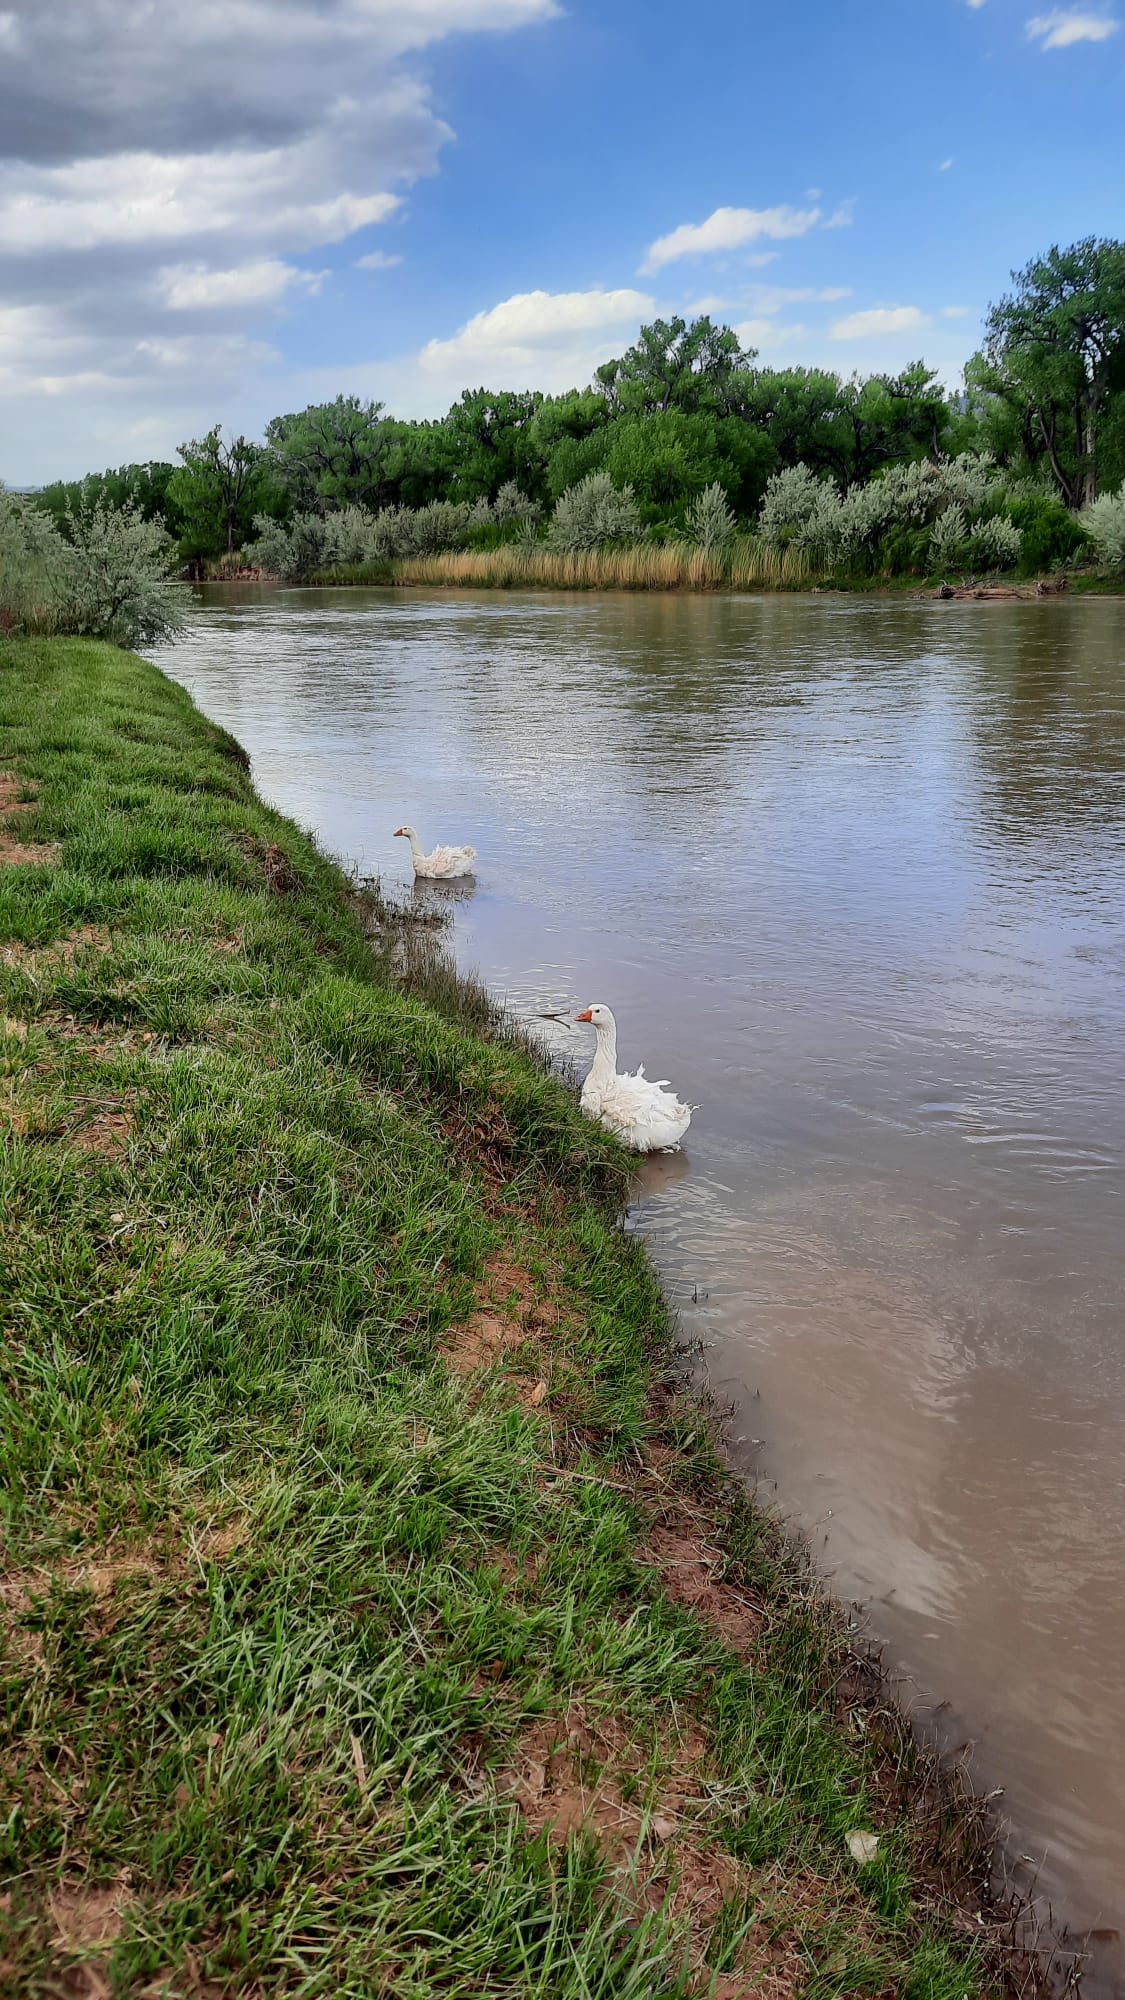 The Chama River.  Our domestic geese as well as many wild birds and animals visit this paradise.